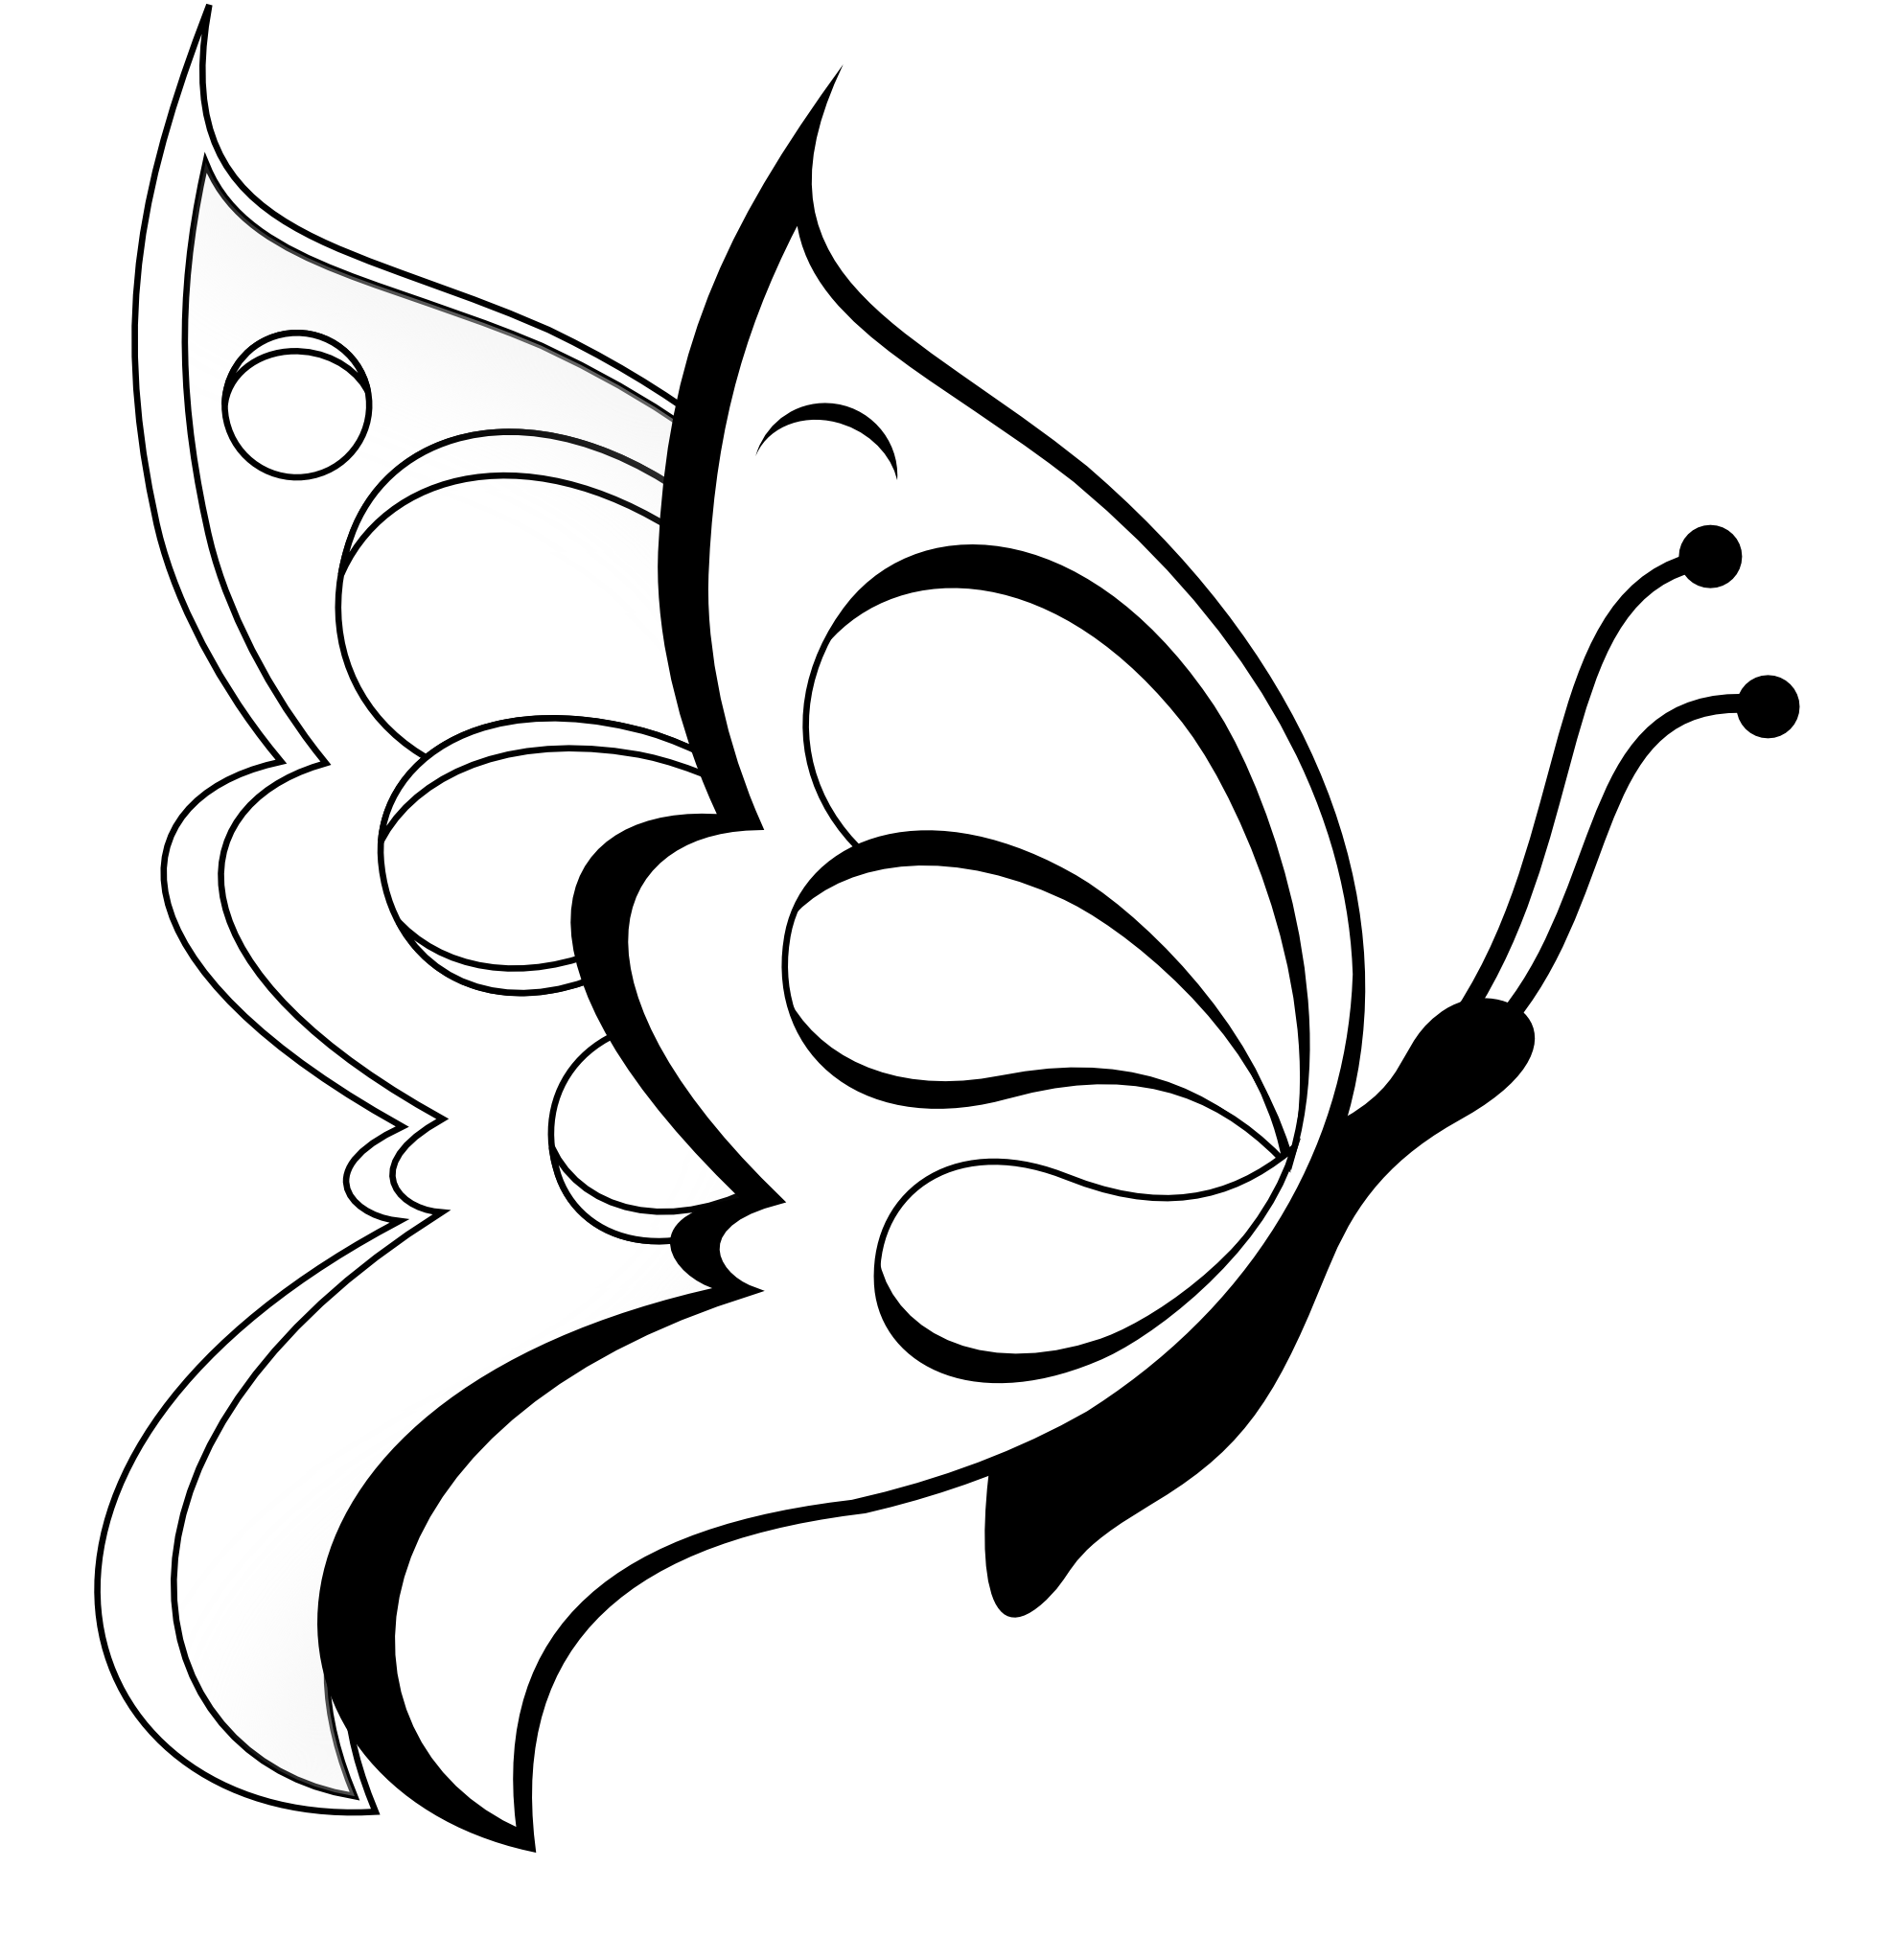 Butterfly Clipart Black And White | Clipart library - Free Clipart 